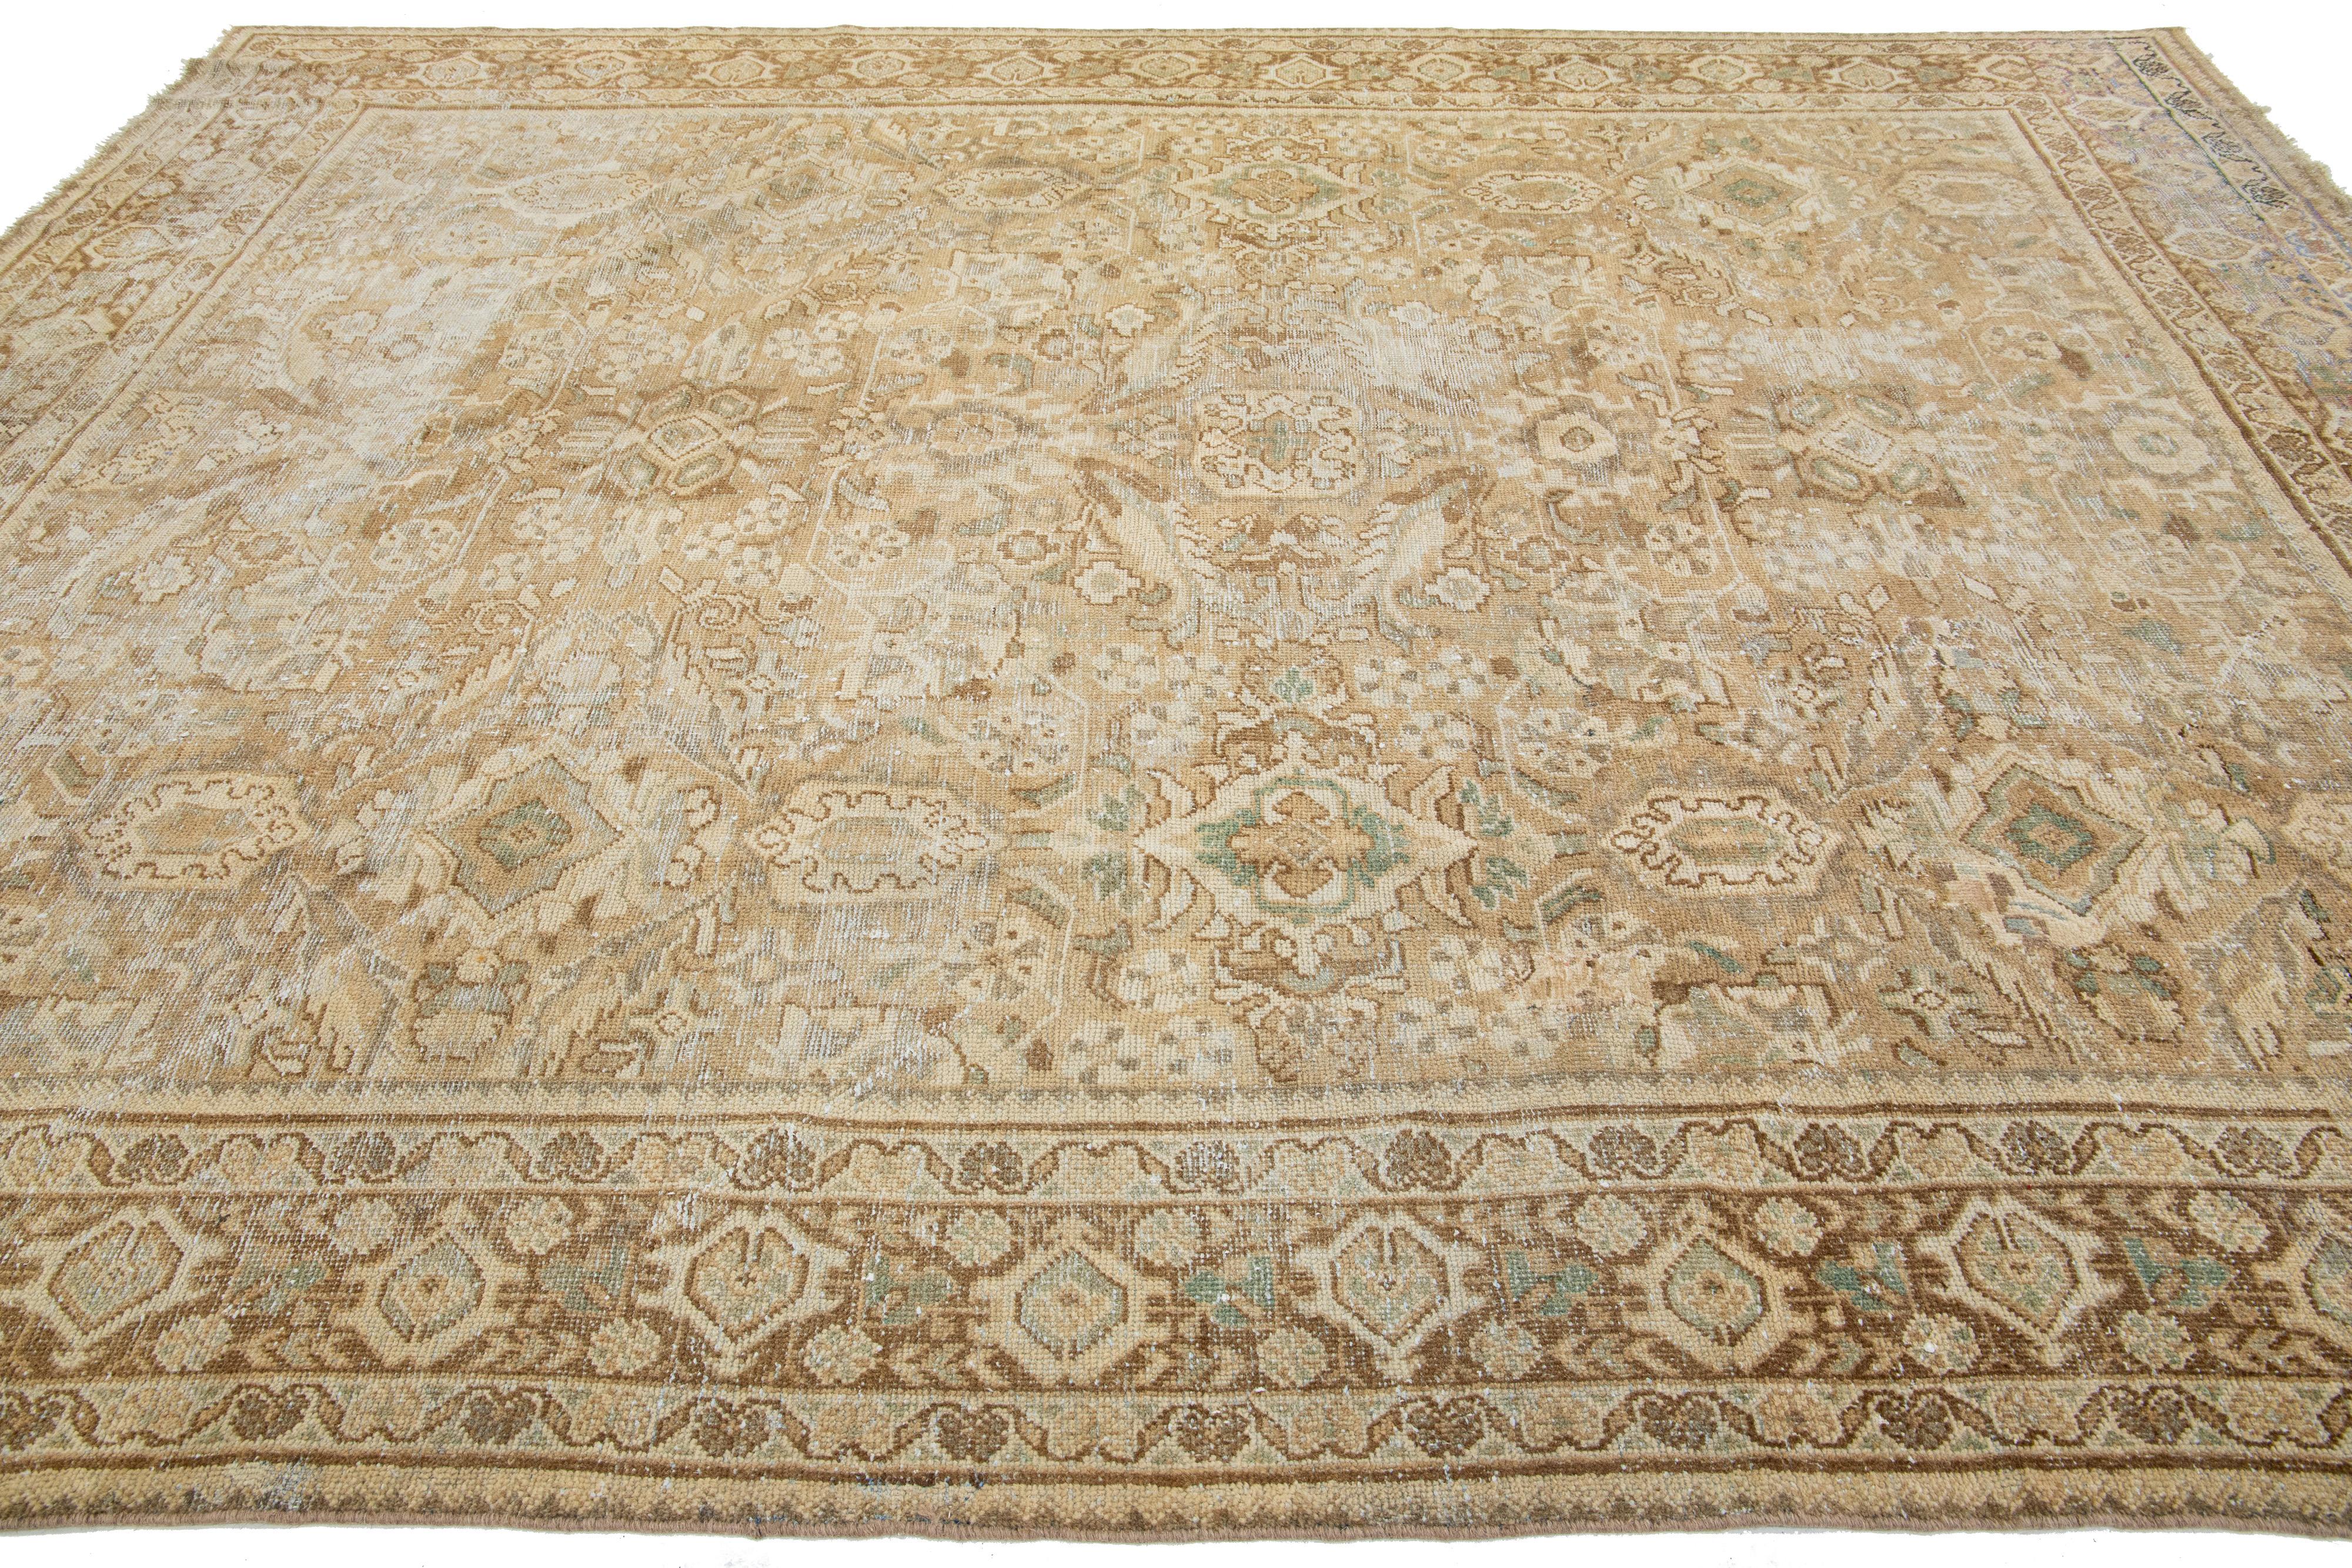 Persian Floral Mahal Wool Rug Vintage Handmade With Beige Field In Good Condition For Sale In Norwalk, CT